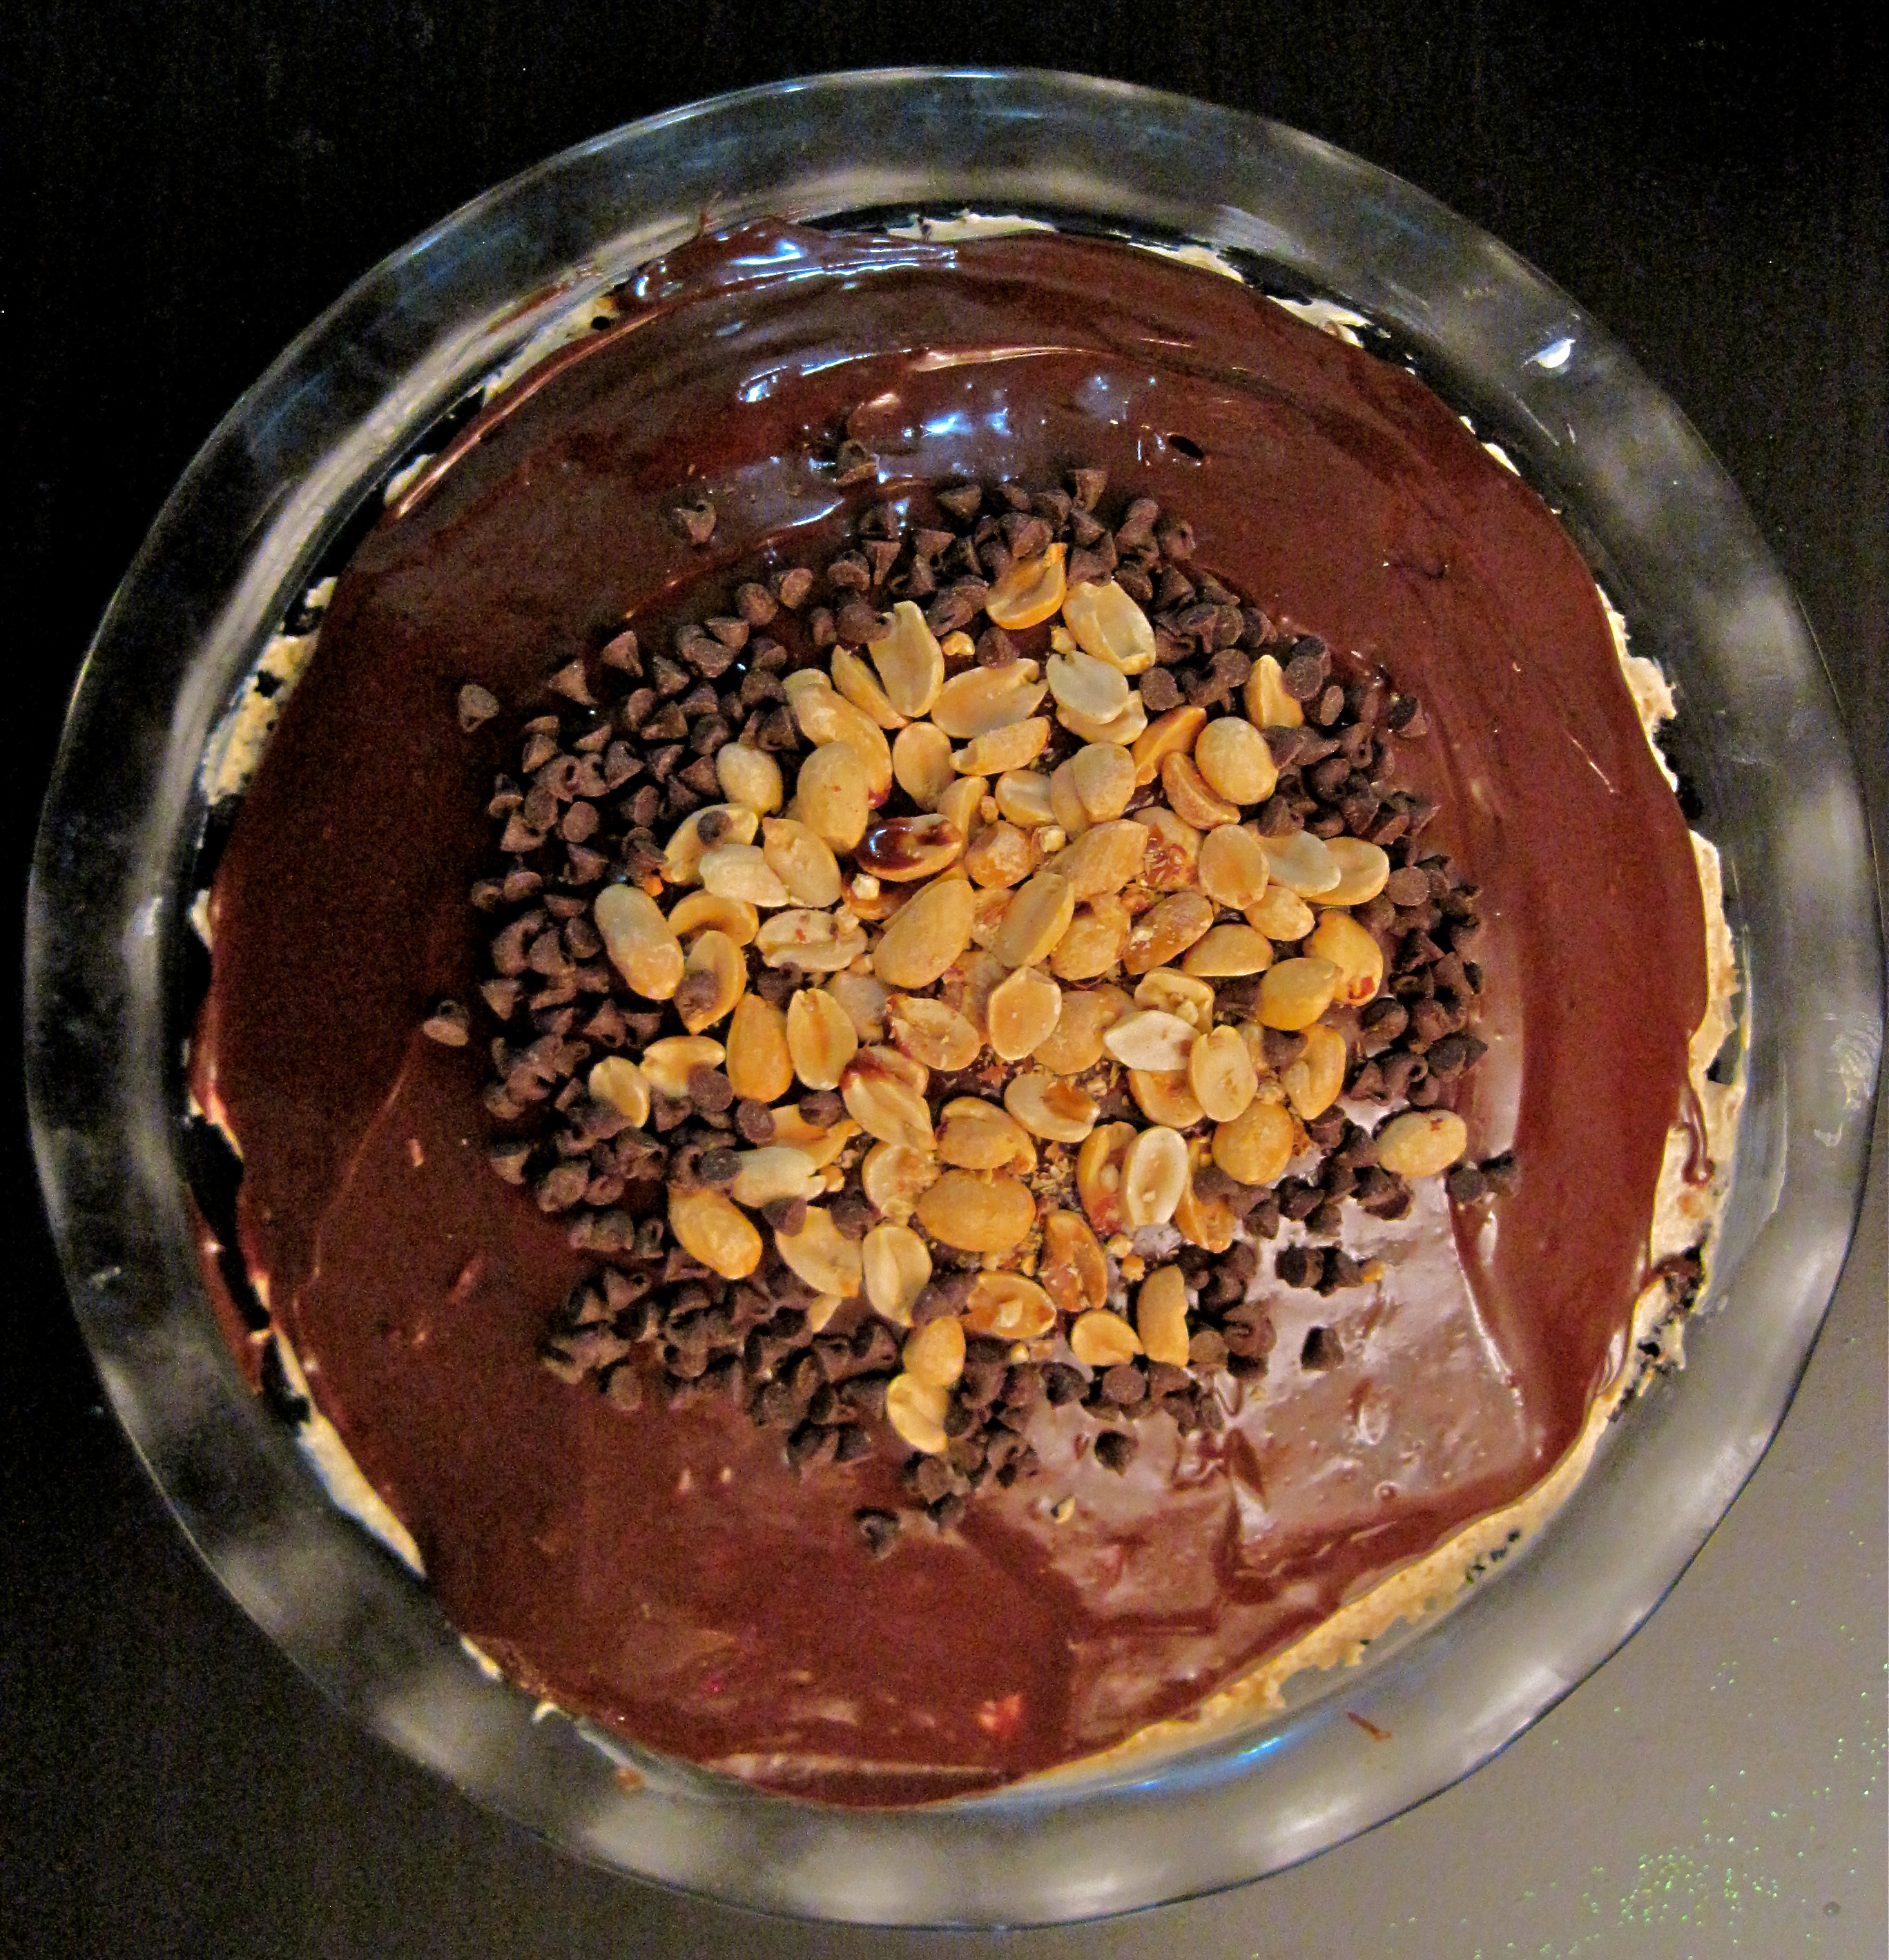 Chocolate and Peanut Butter Mousse Pie